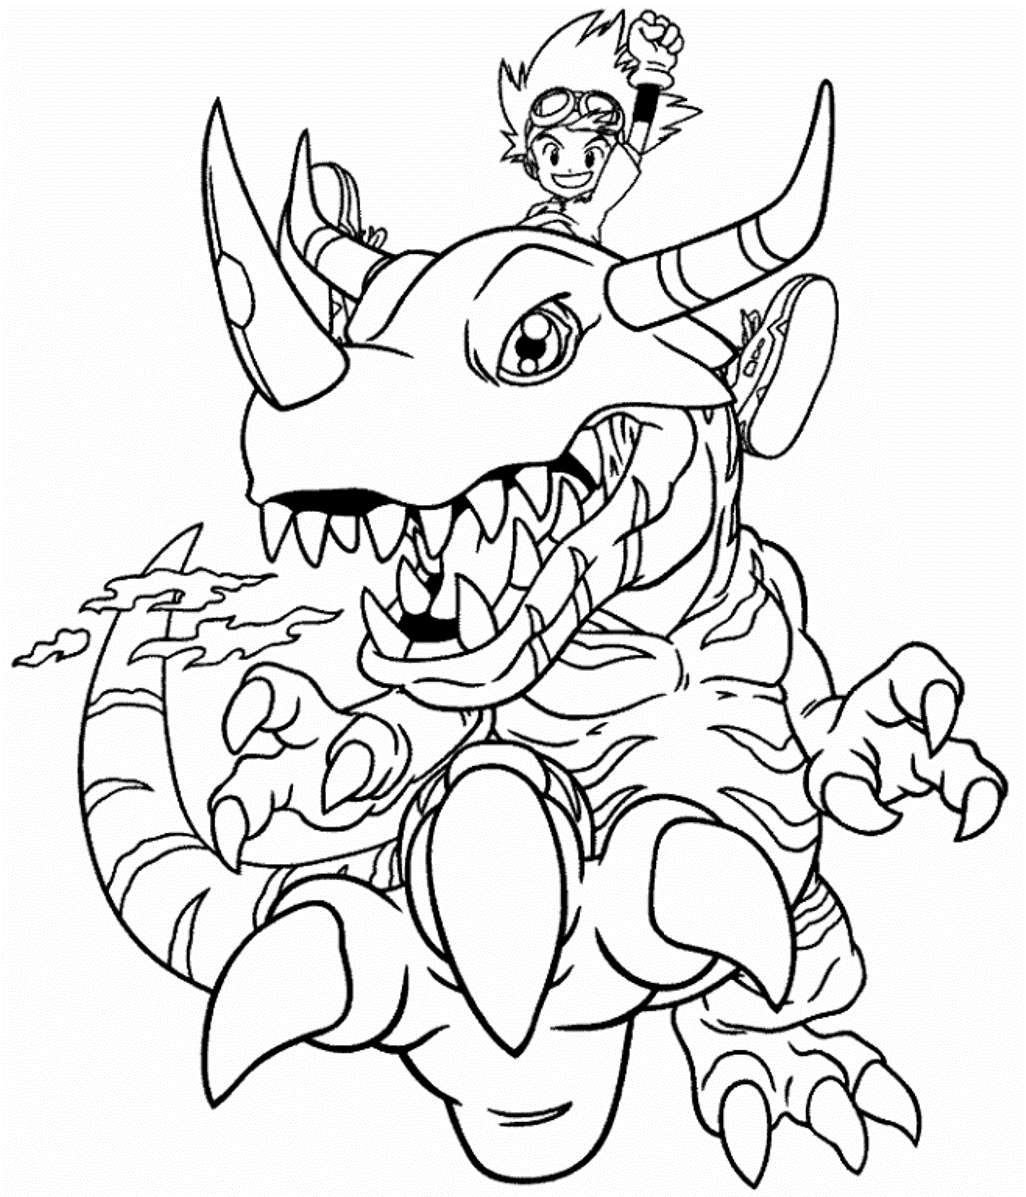 Metal Greymon Digimon Coloring Pages | Cartoon Coloring pages of ...